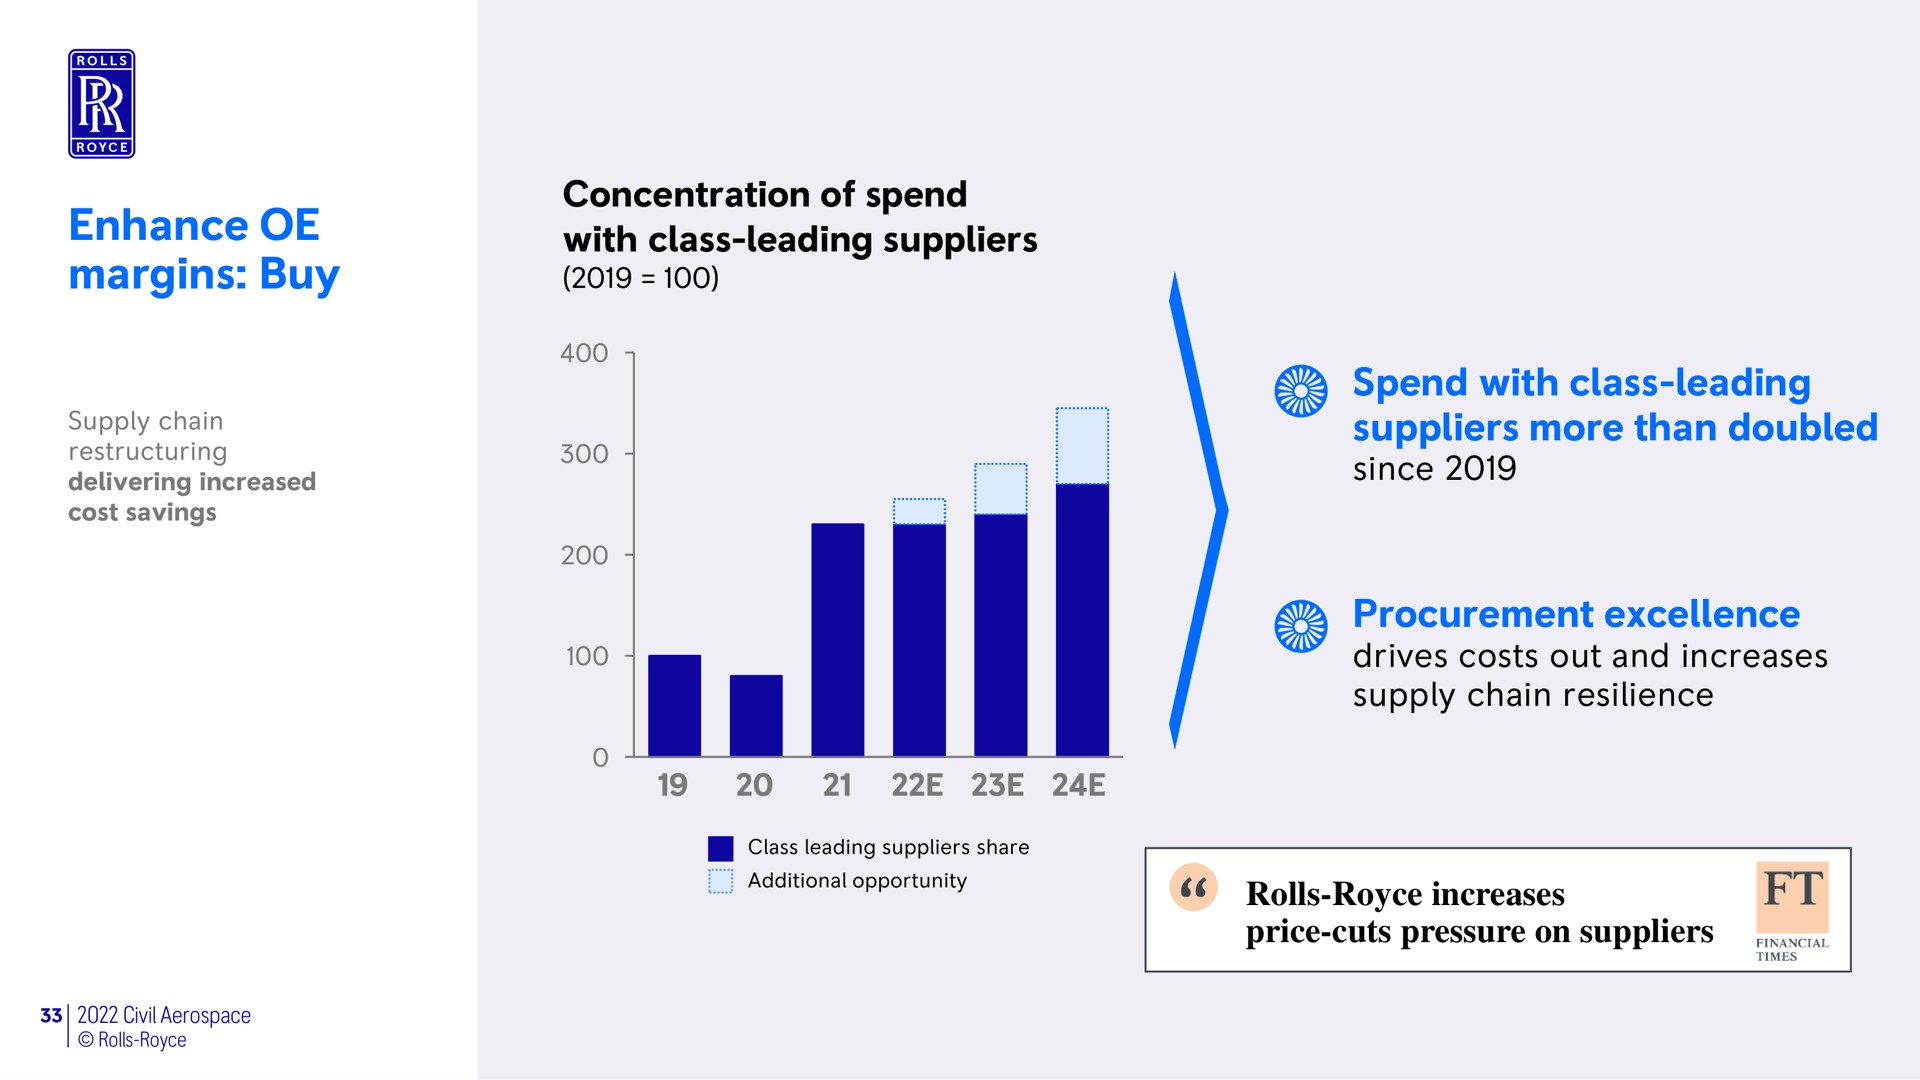 enhance margins buy concentration of spend with class leading suppliers spend with class leading suppliers more than doubled since procurement excellence drives costs out and increases supply chain resilience rolls increases price cuts pressure on suppliers a | Rolls-Royce Holdings